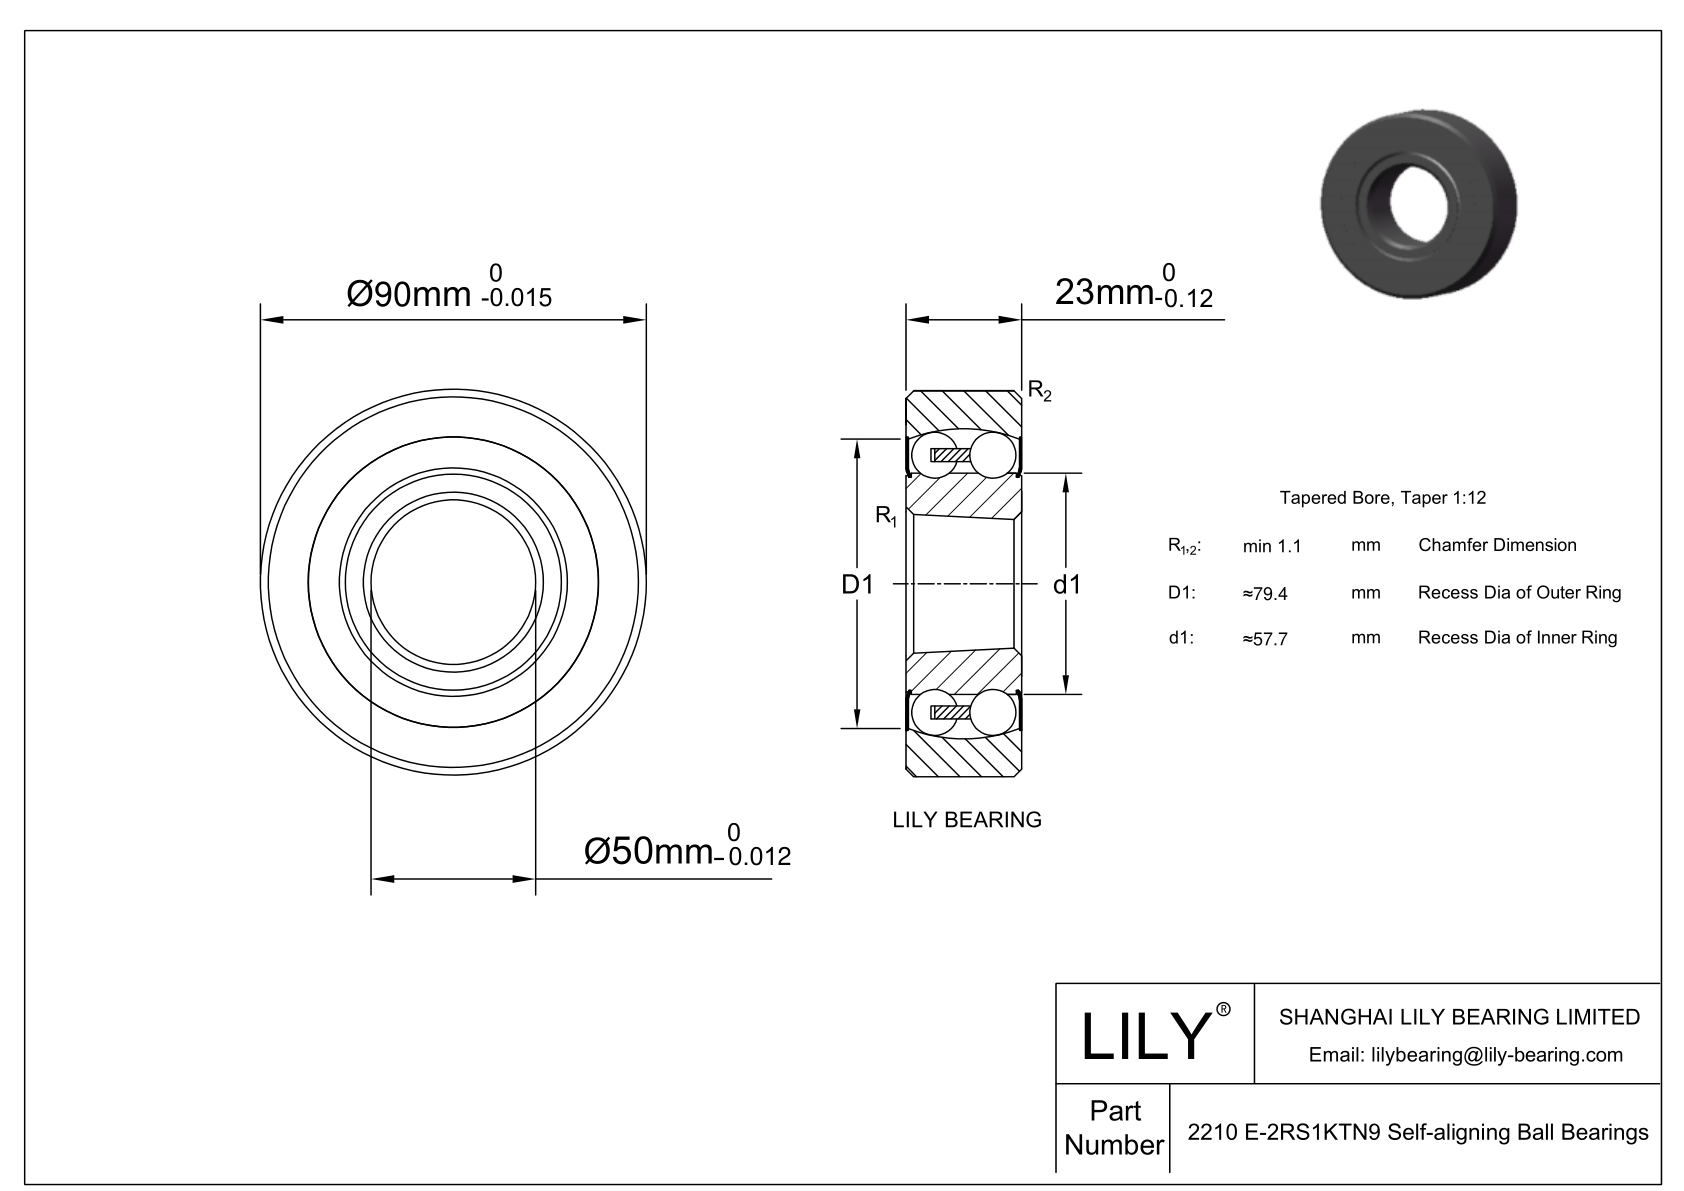 CE2210 E-SCPP Silicon Carbide Self Aligning Ball Bearings cad drawing